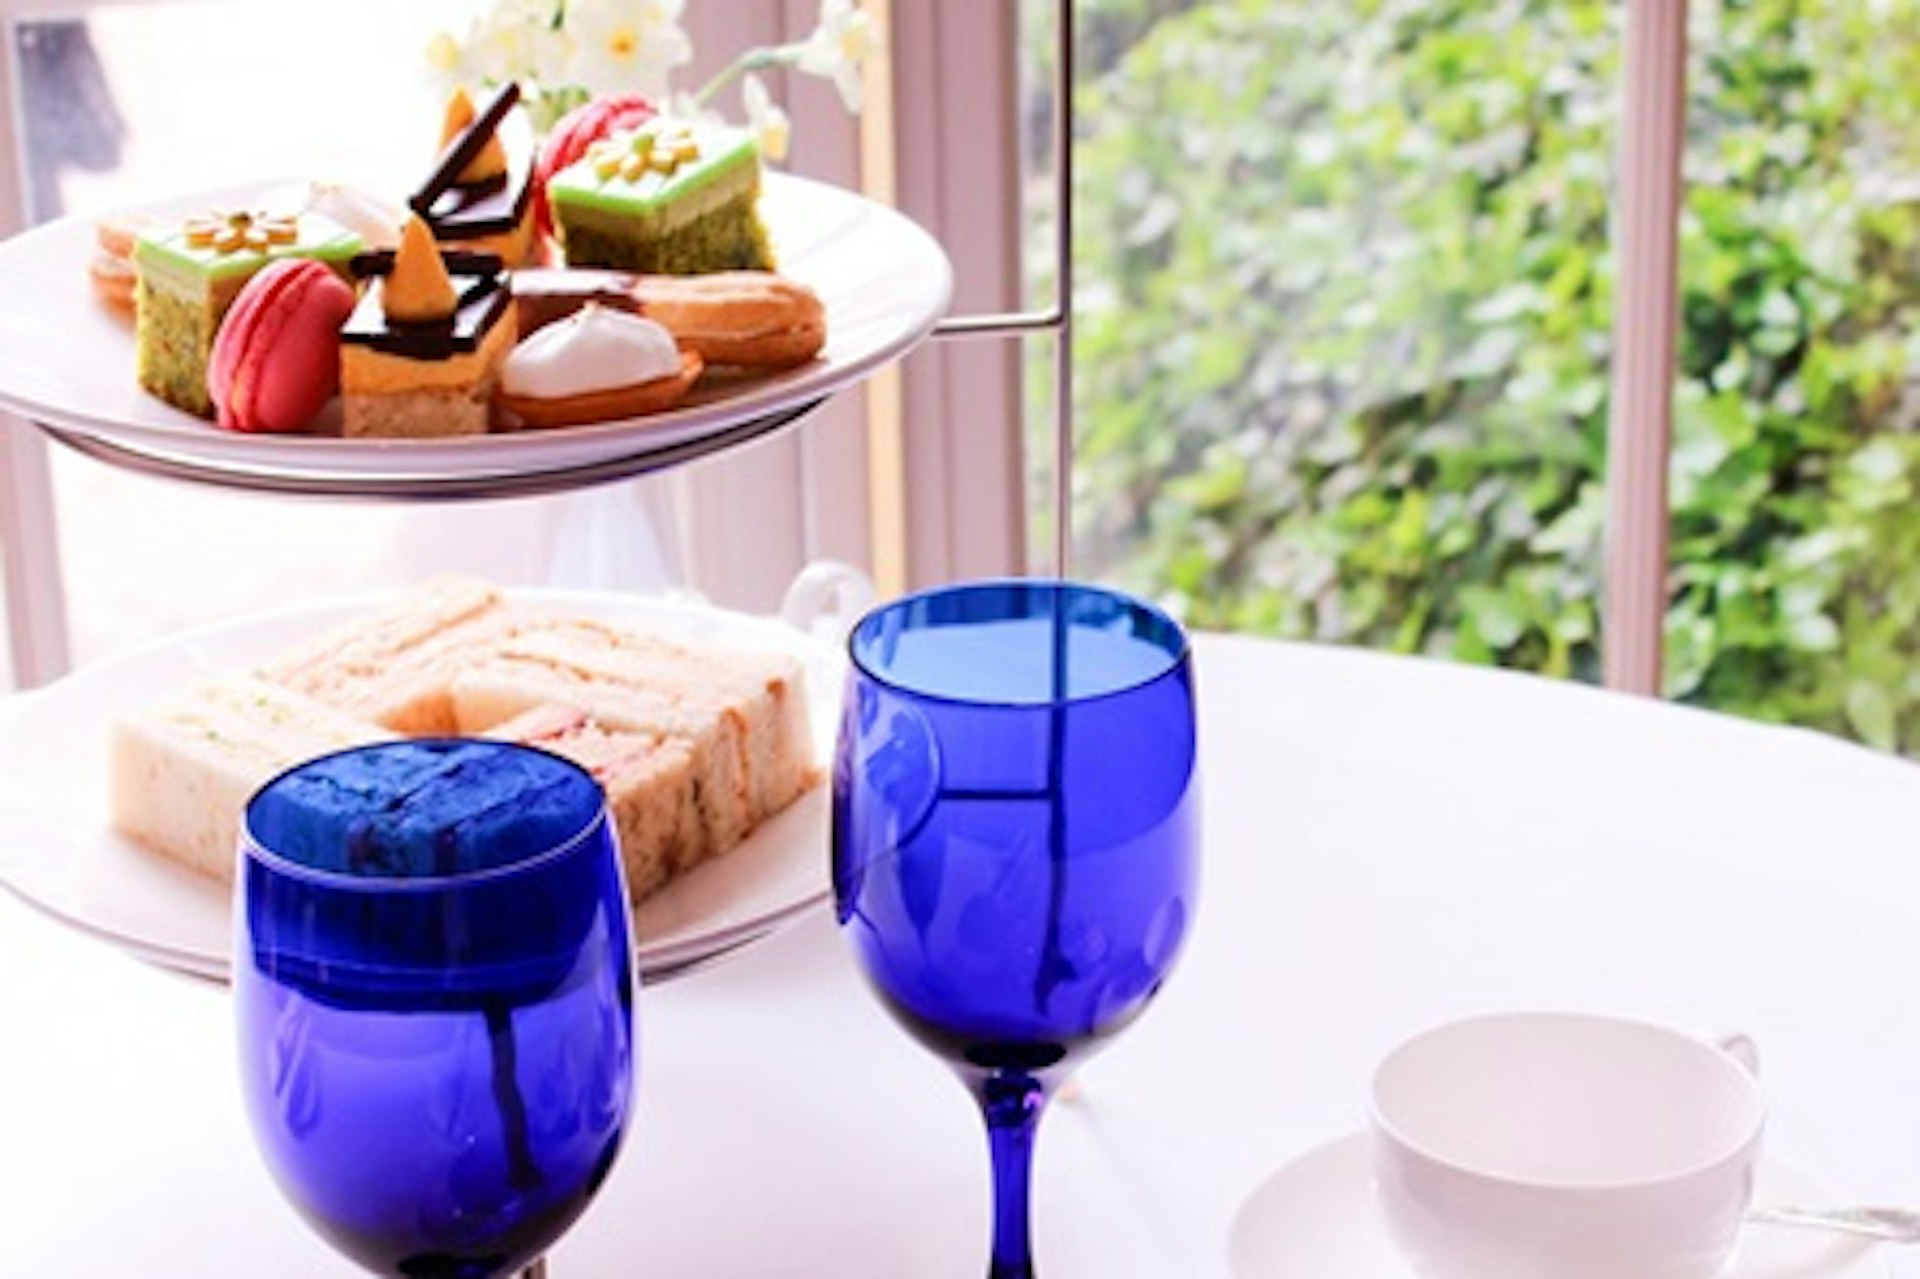 Afternoon Tea for Two at The Royal Crescent Hotel & Spa, Bath 2